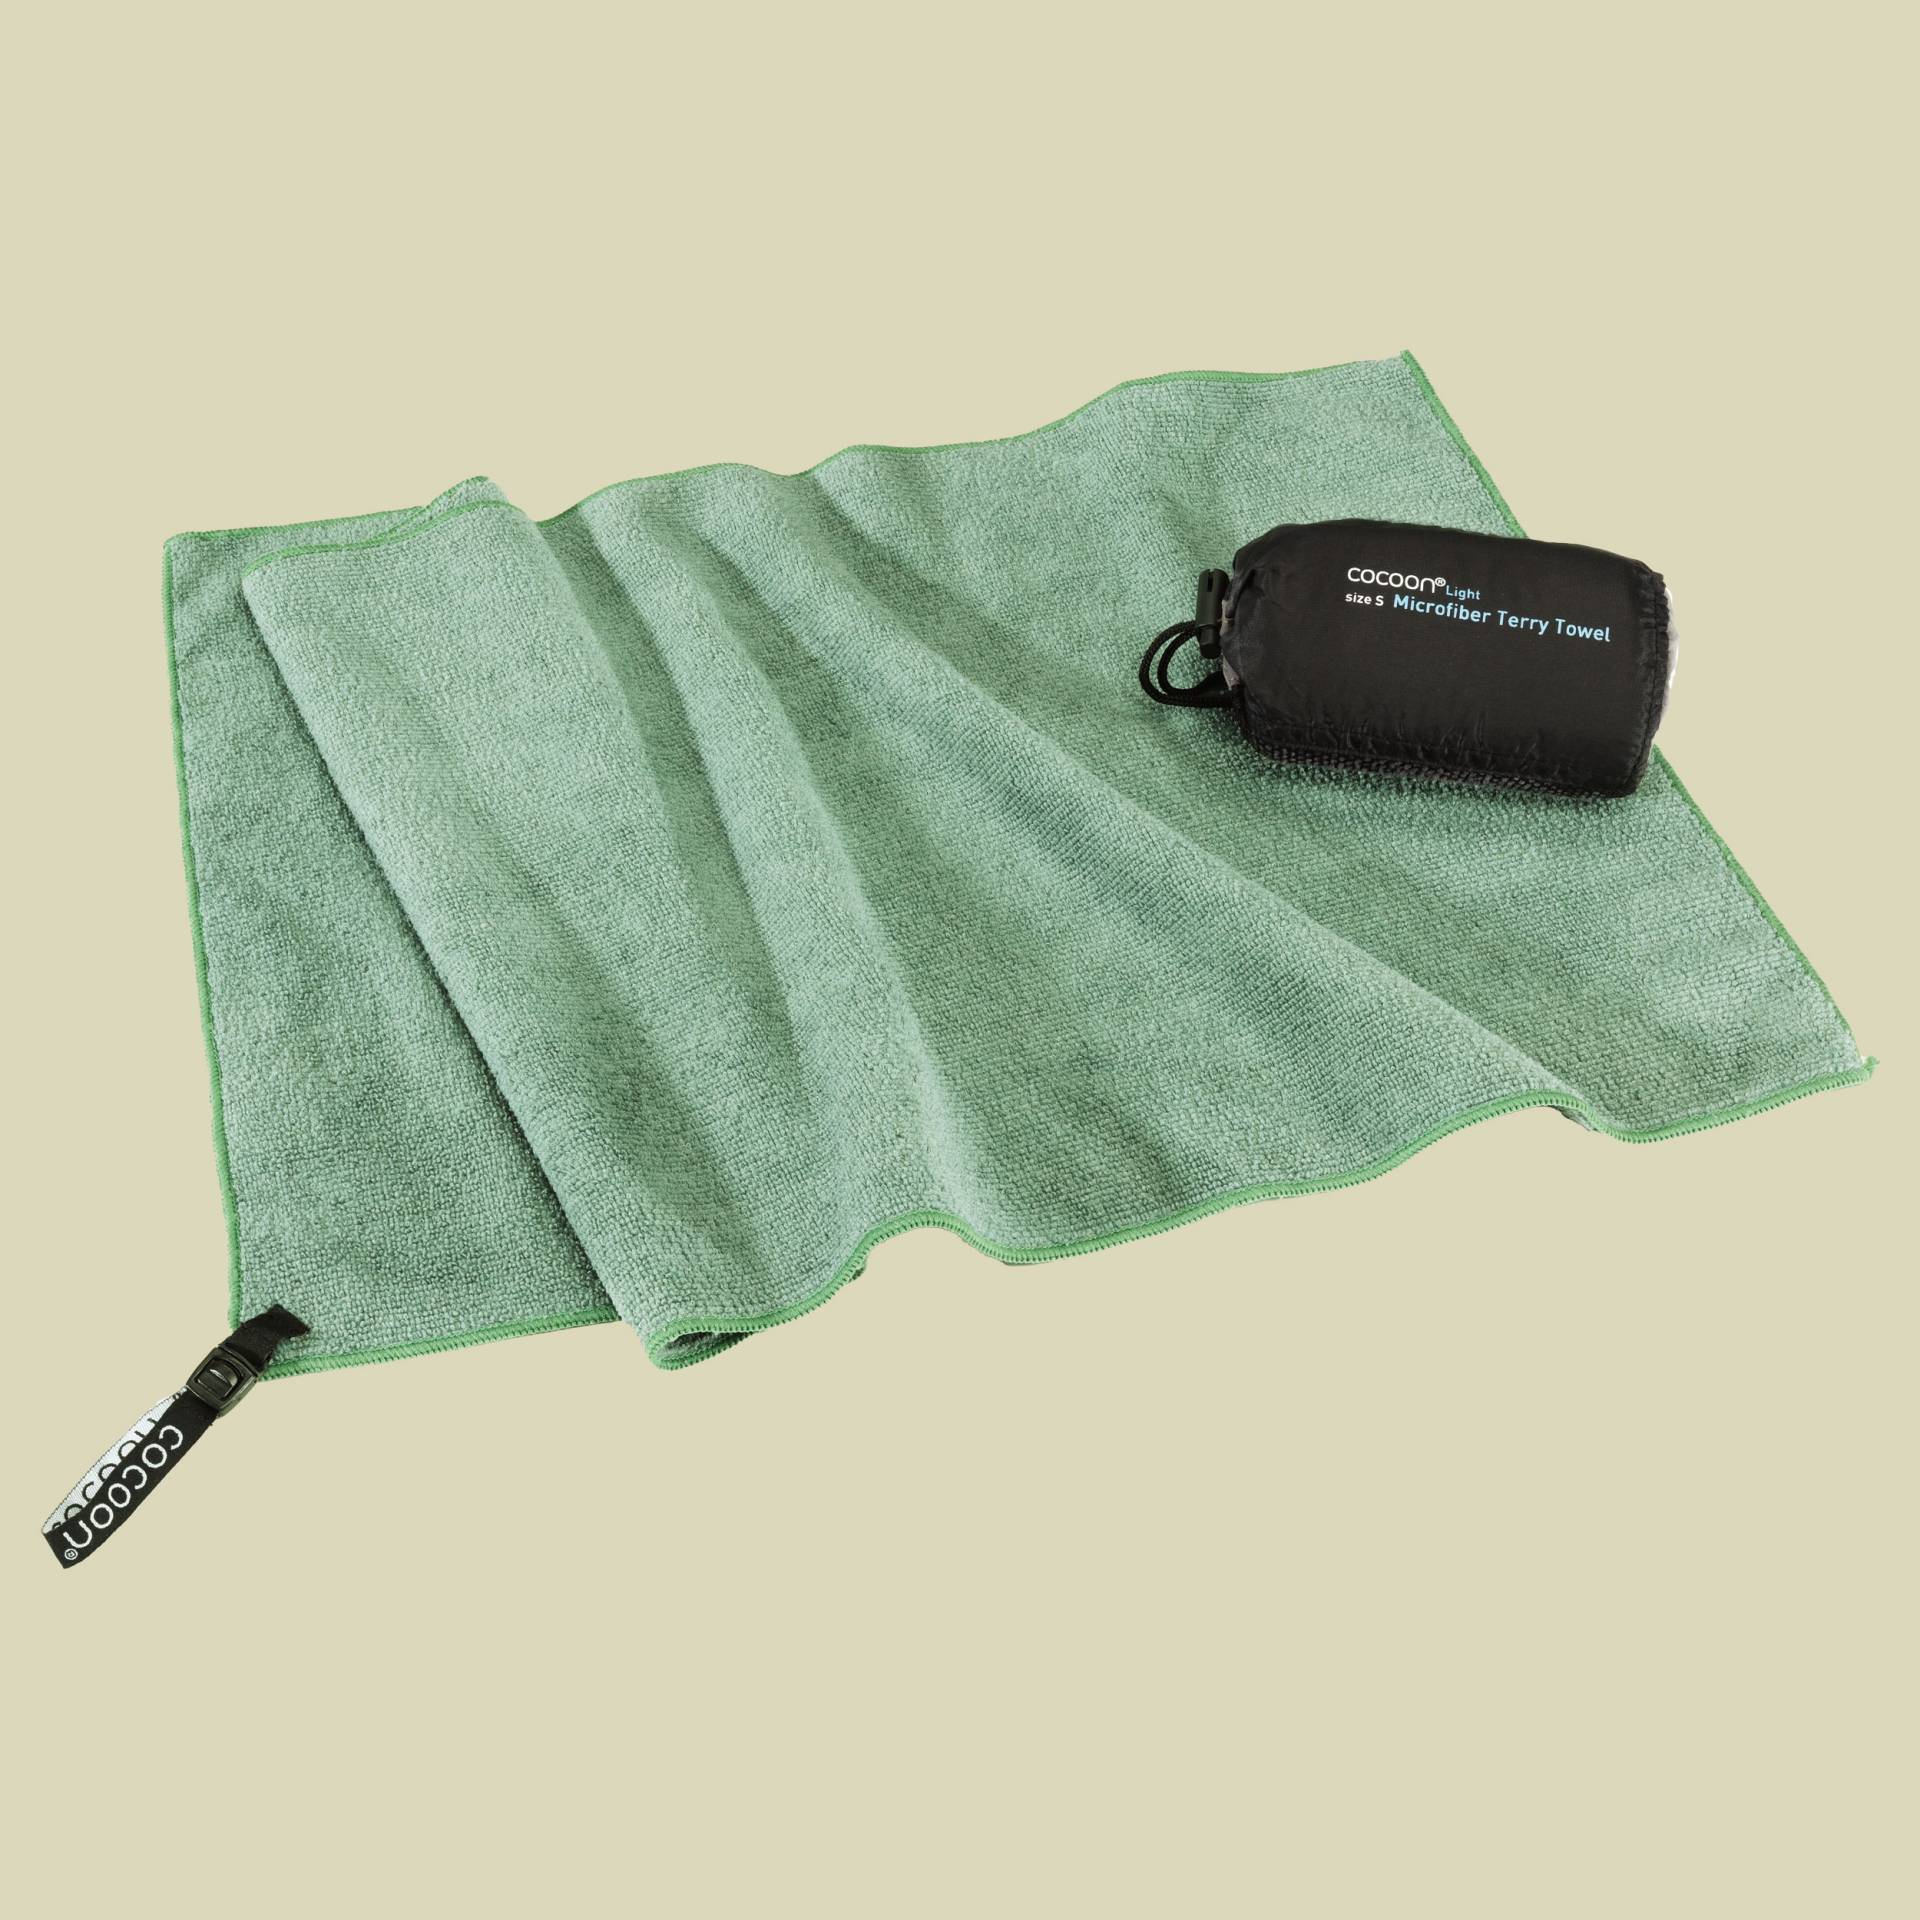 Terry Towel Light Größe x-large Farbe bamboo green von Cocoon